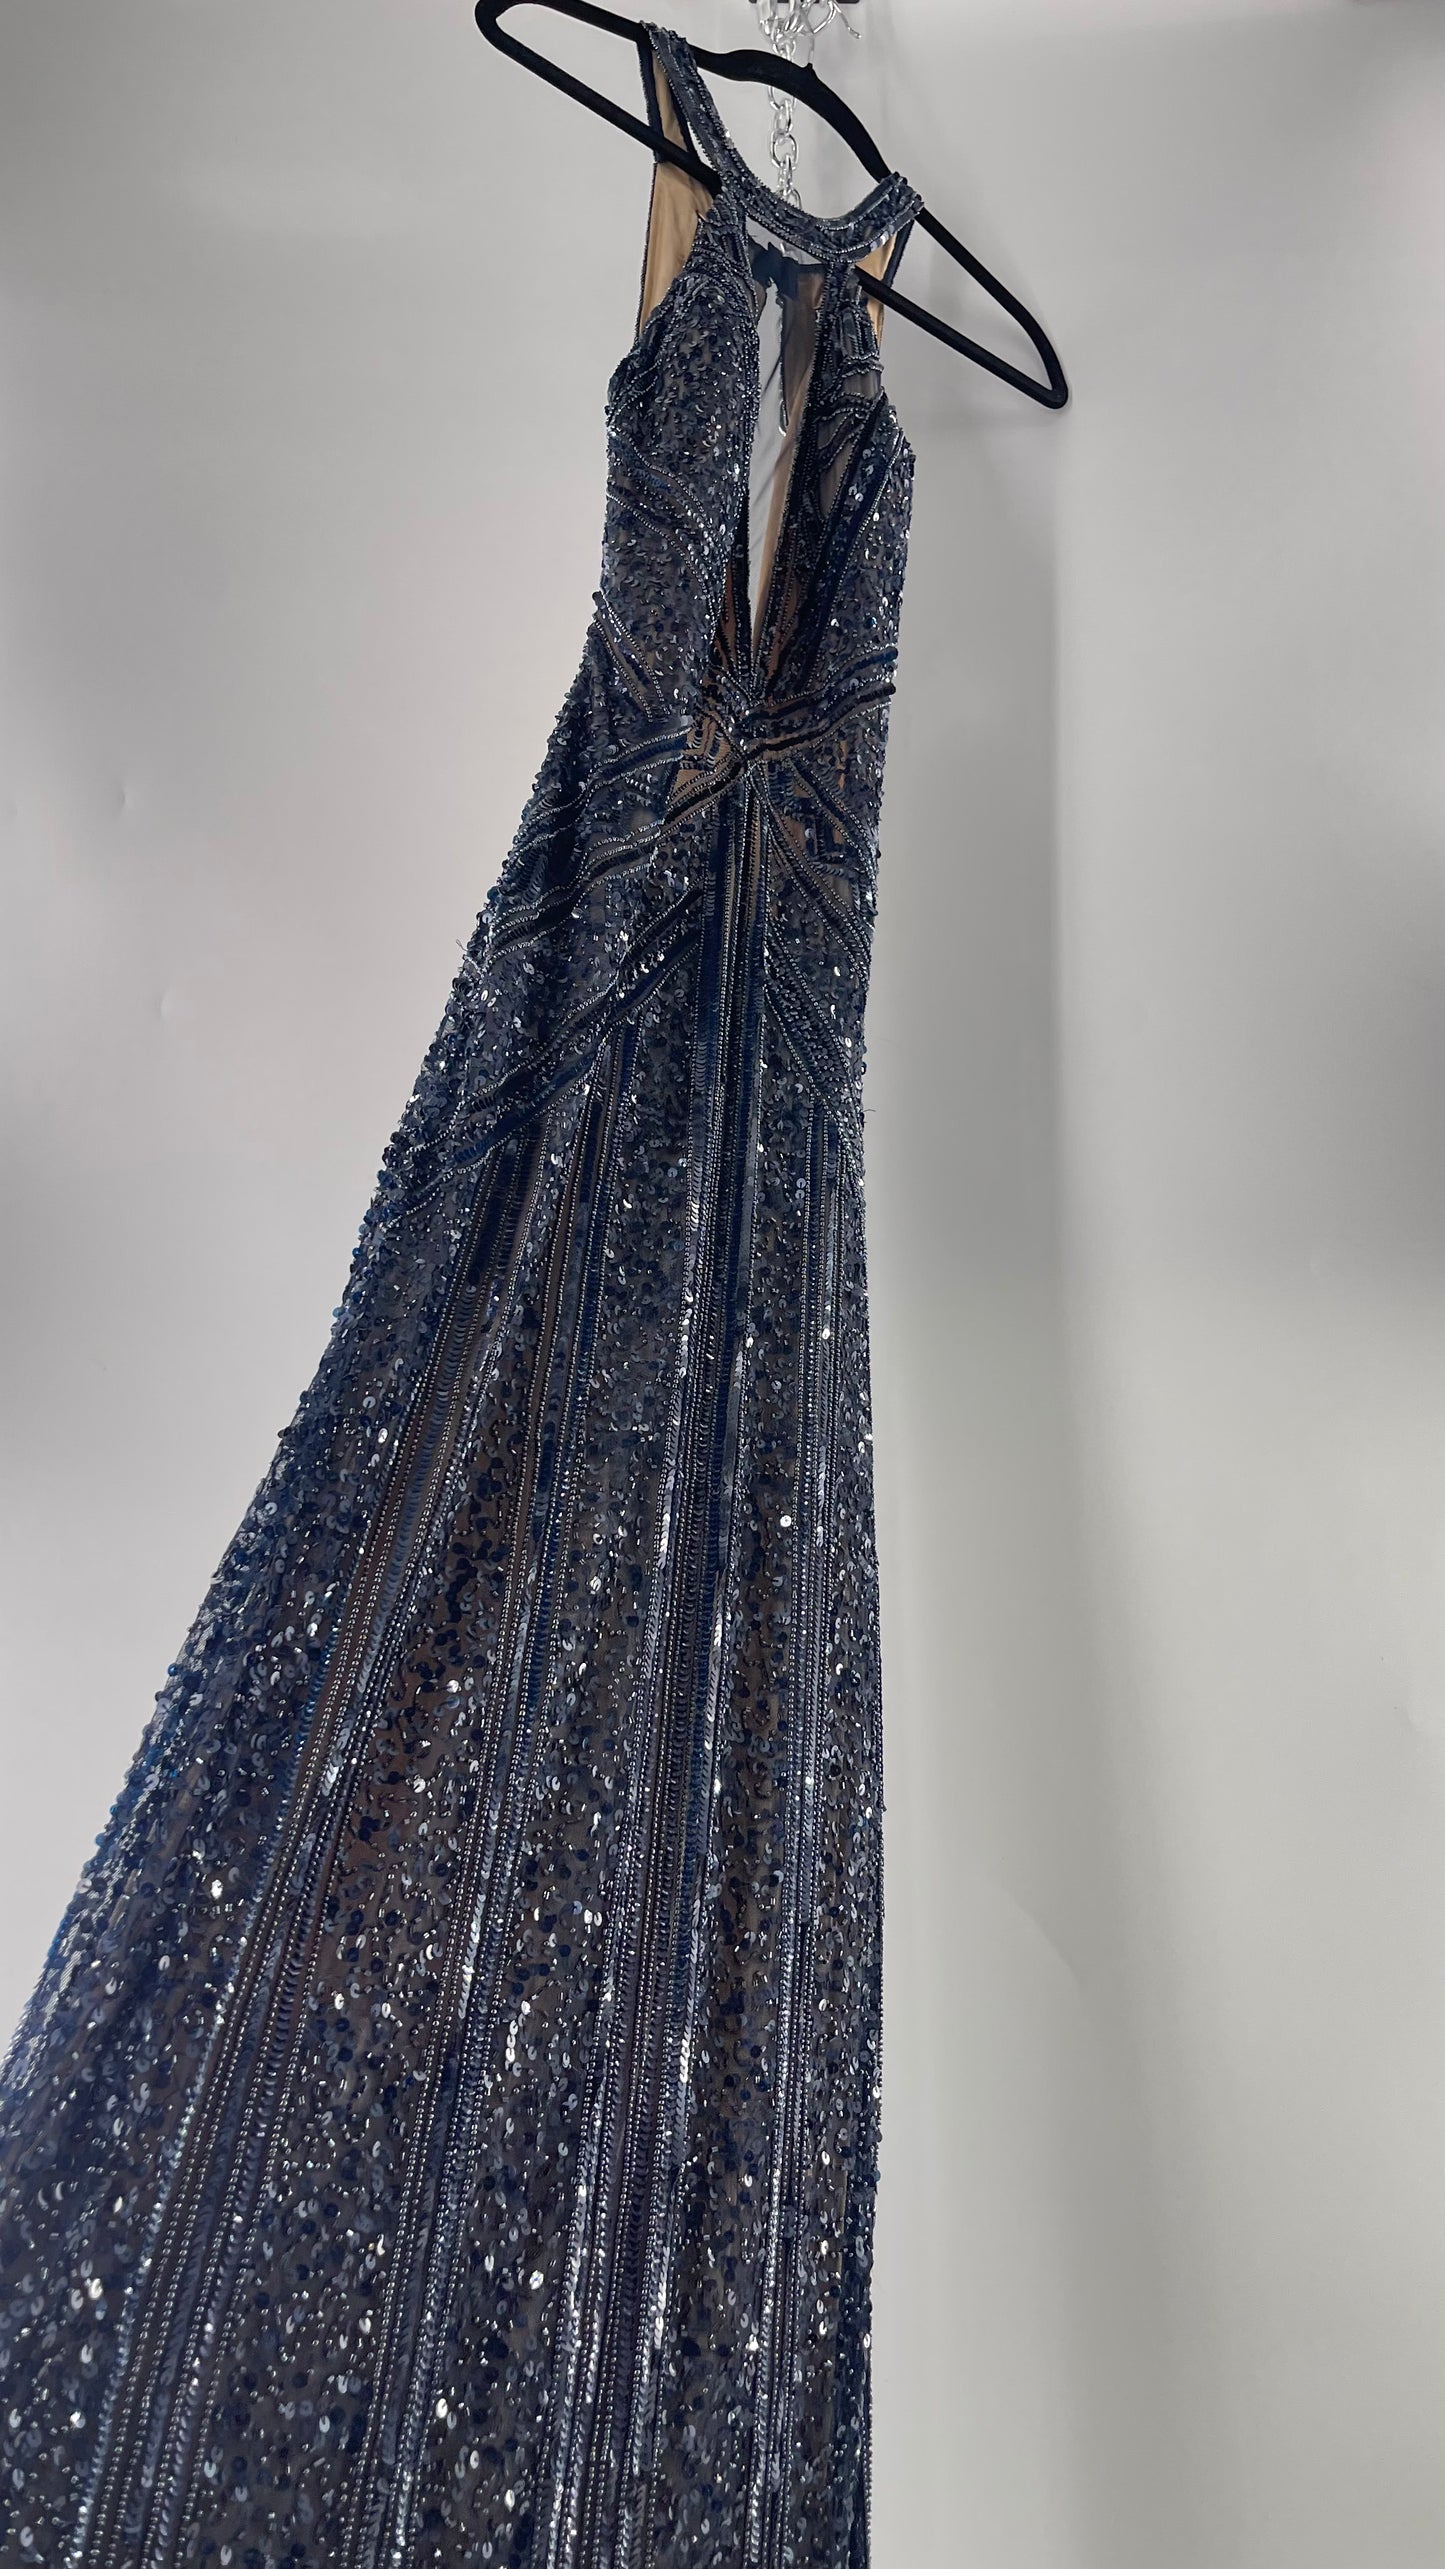 Vintage SCALA Navy Blue Beaded Floor Length Gown with Plunging Neckline, Backless Detail, and Tan Underlay (C)(4)